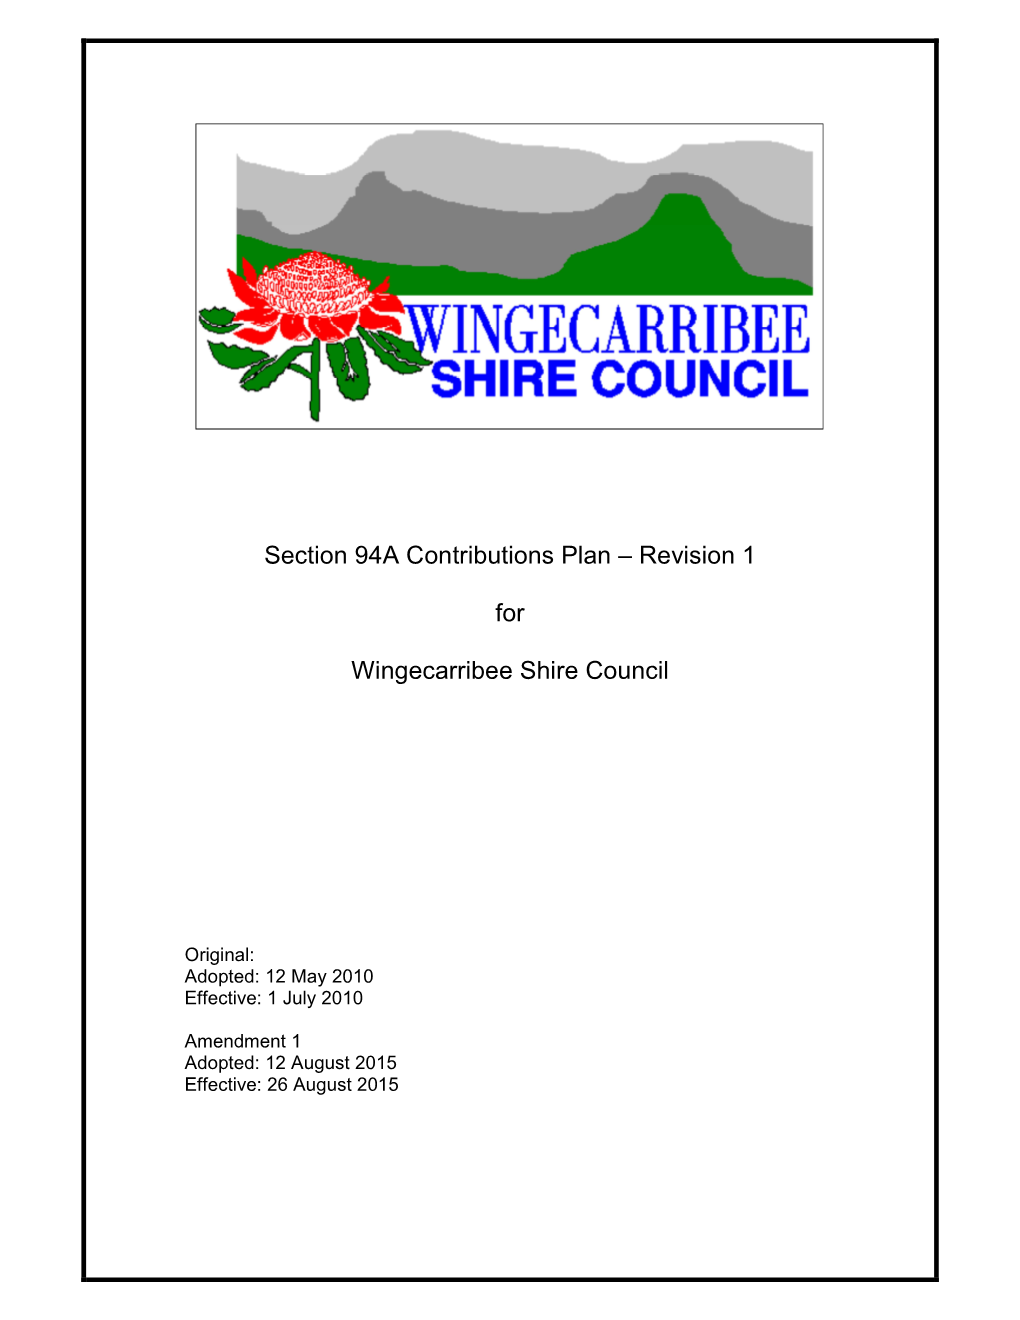 Section 94A Contributions Plan – Revision 1 for Wingecarribee Shire